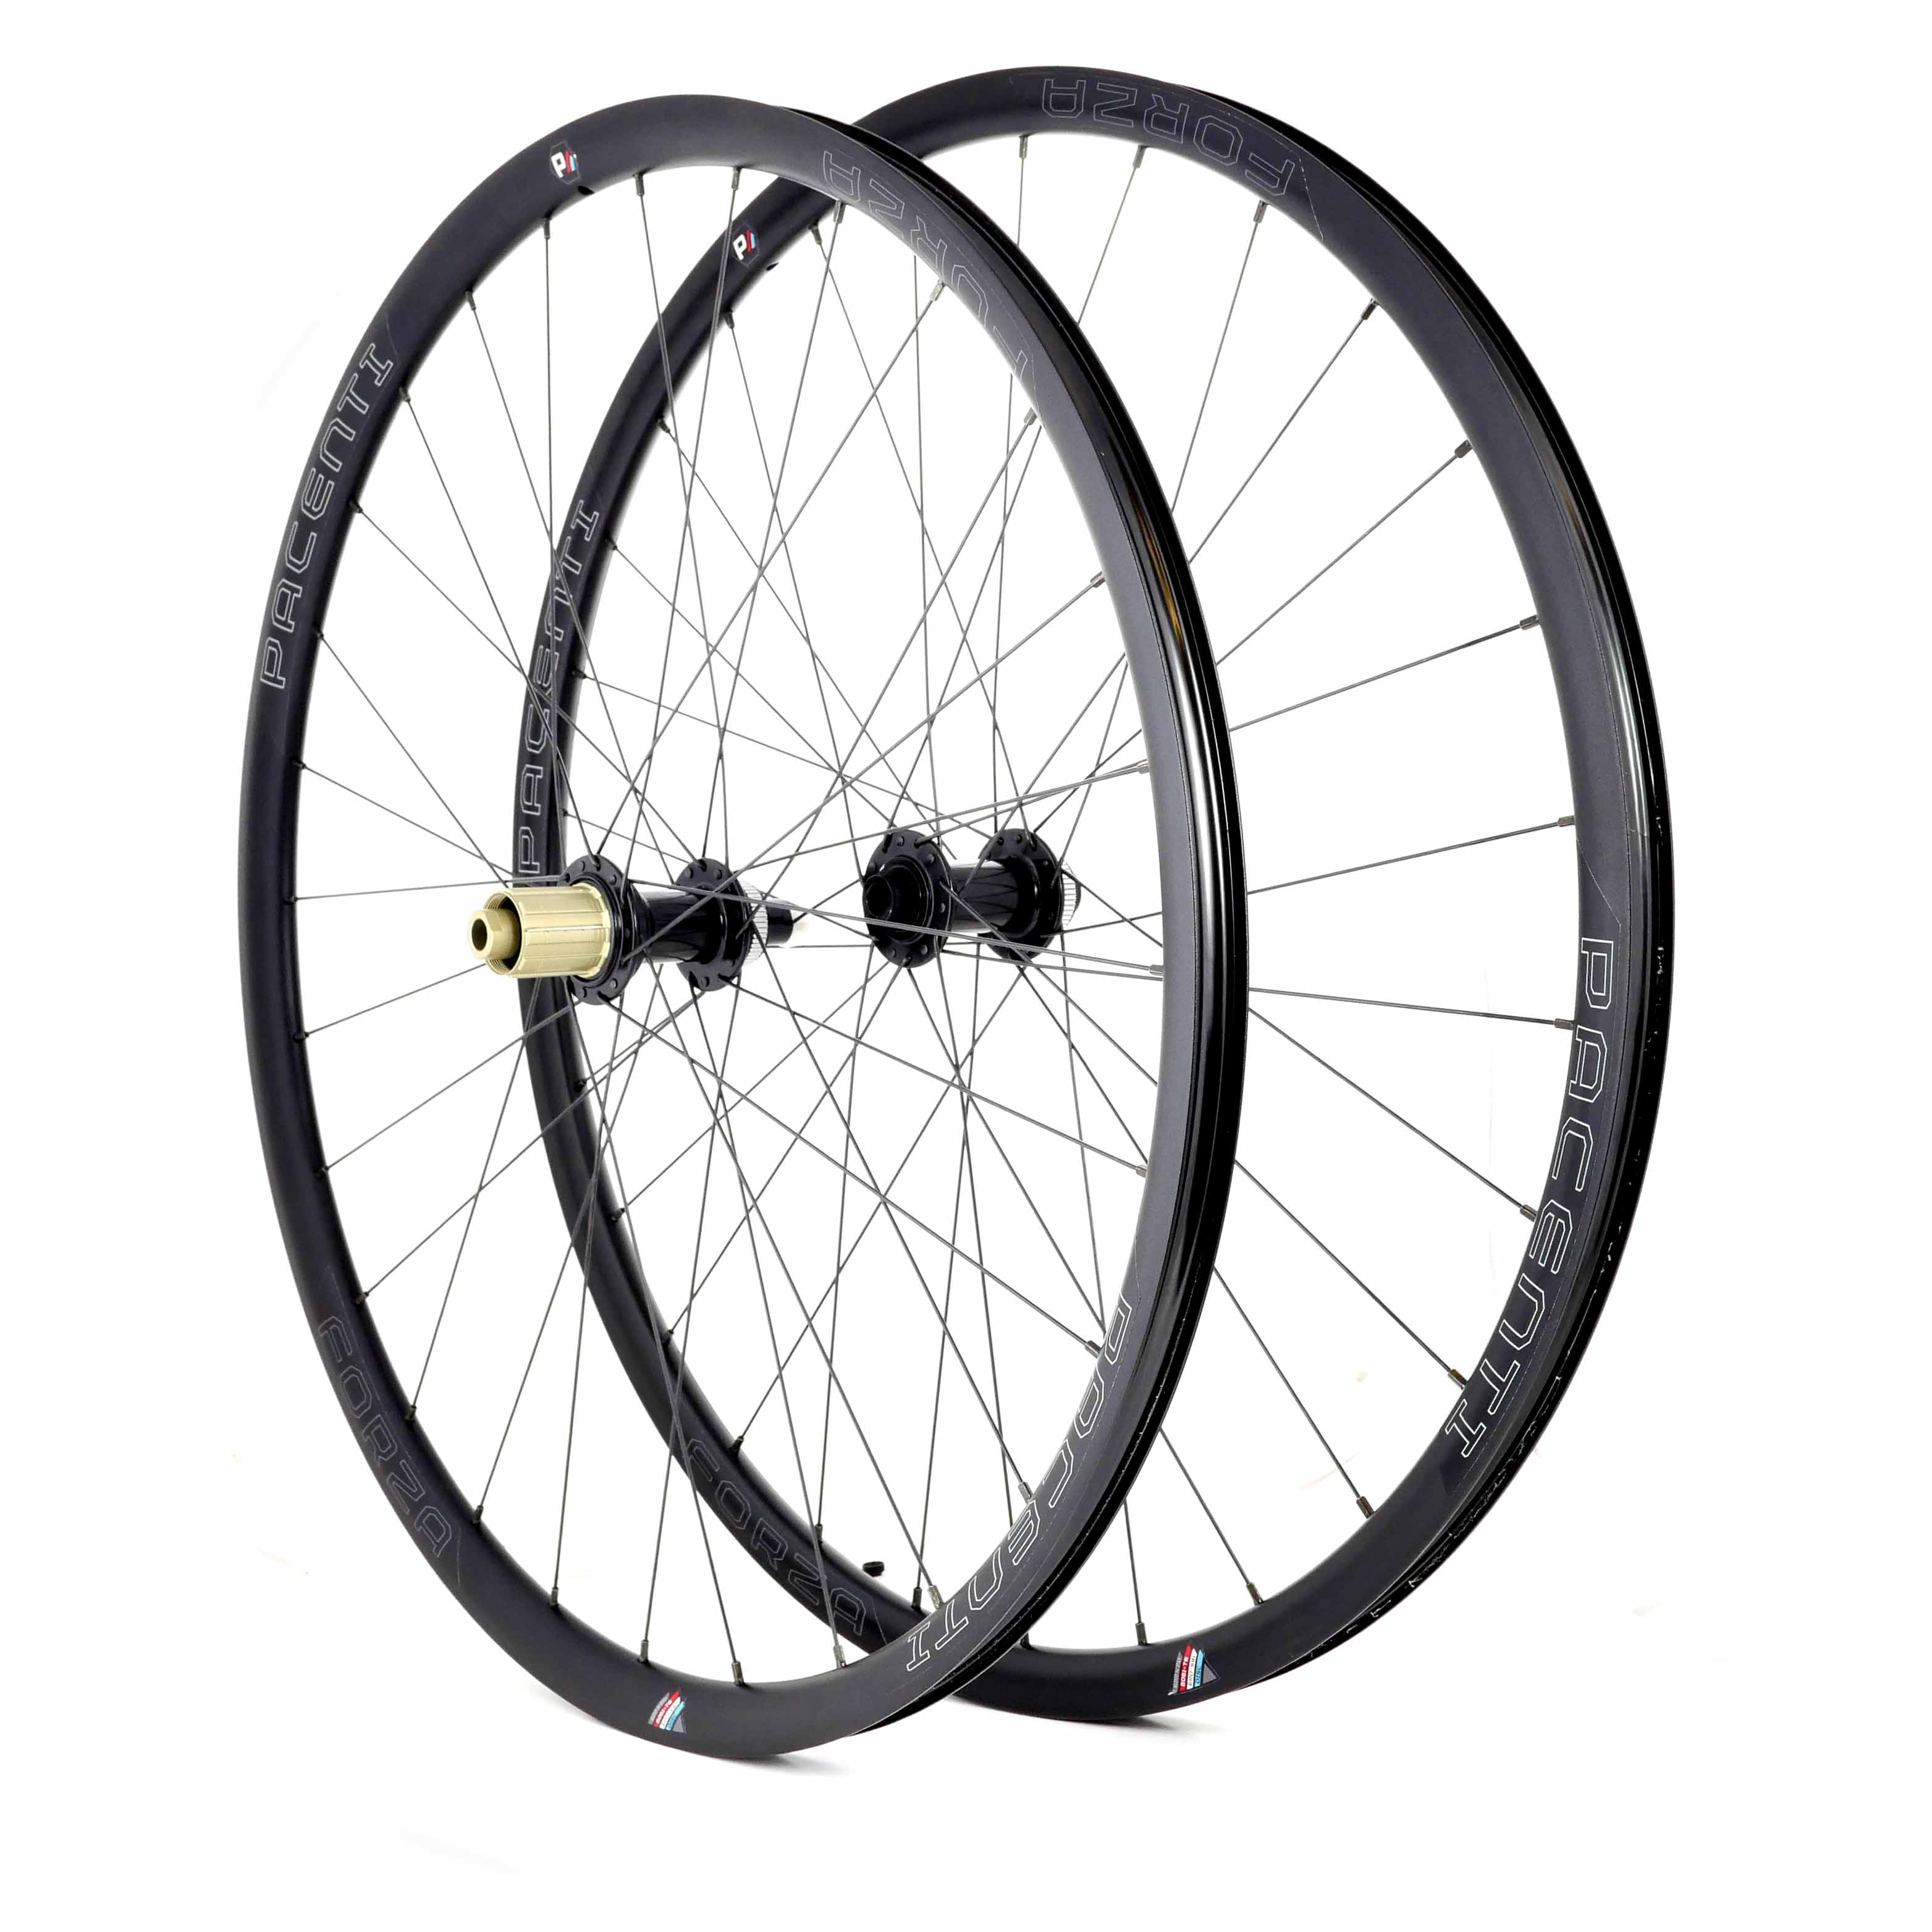 Forza wheelset centre-lock disc brake 700c 12mm – Pacenti Cycle Design